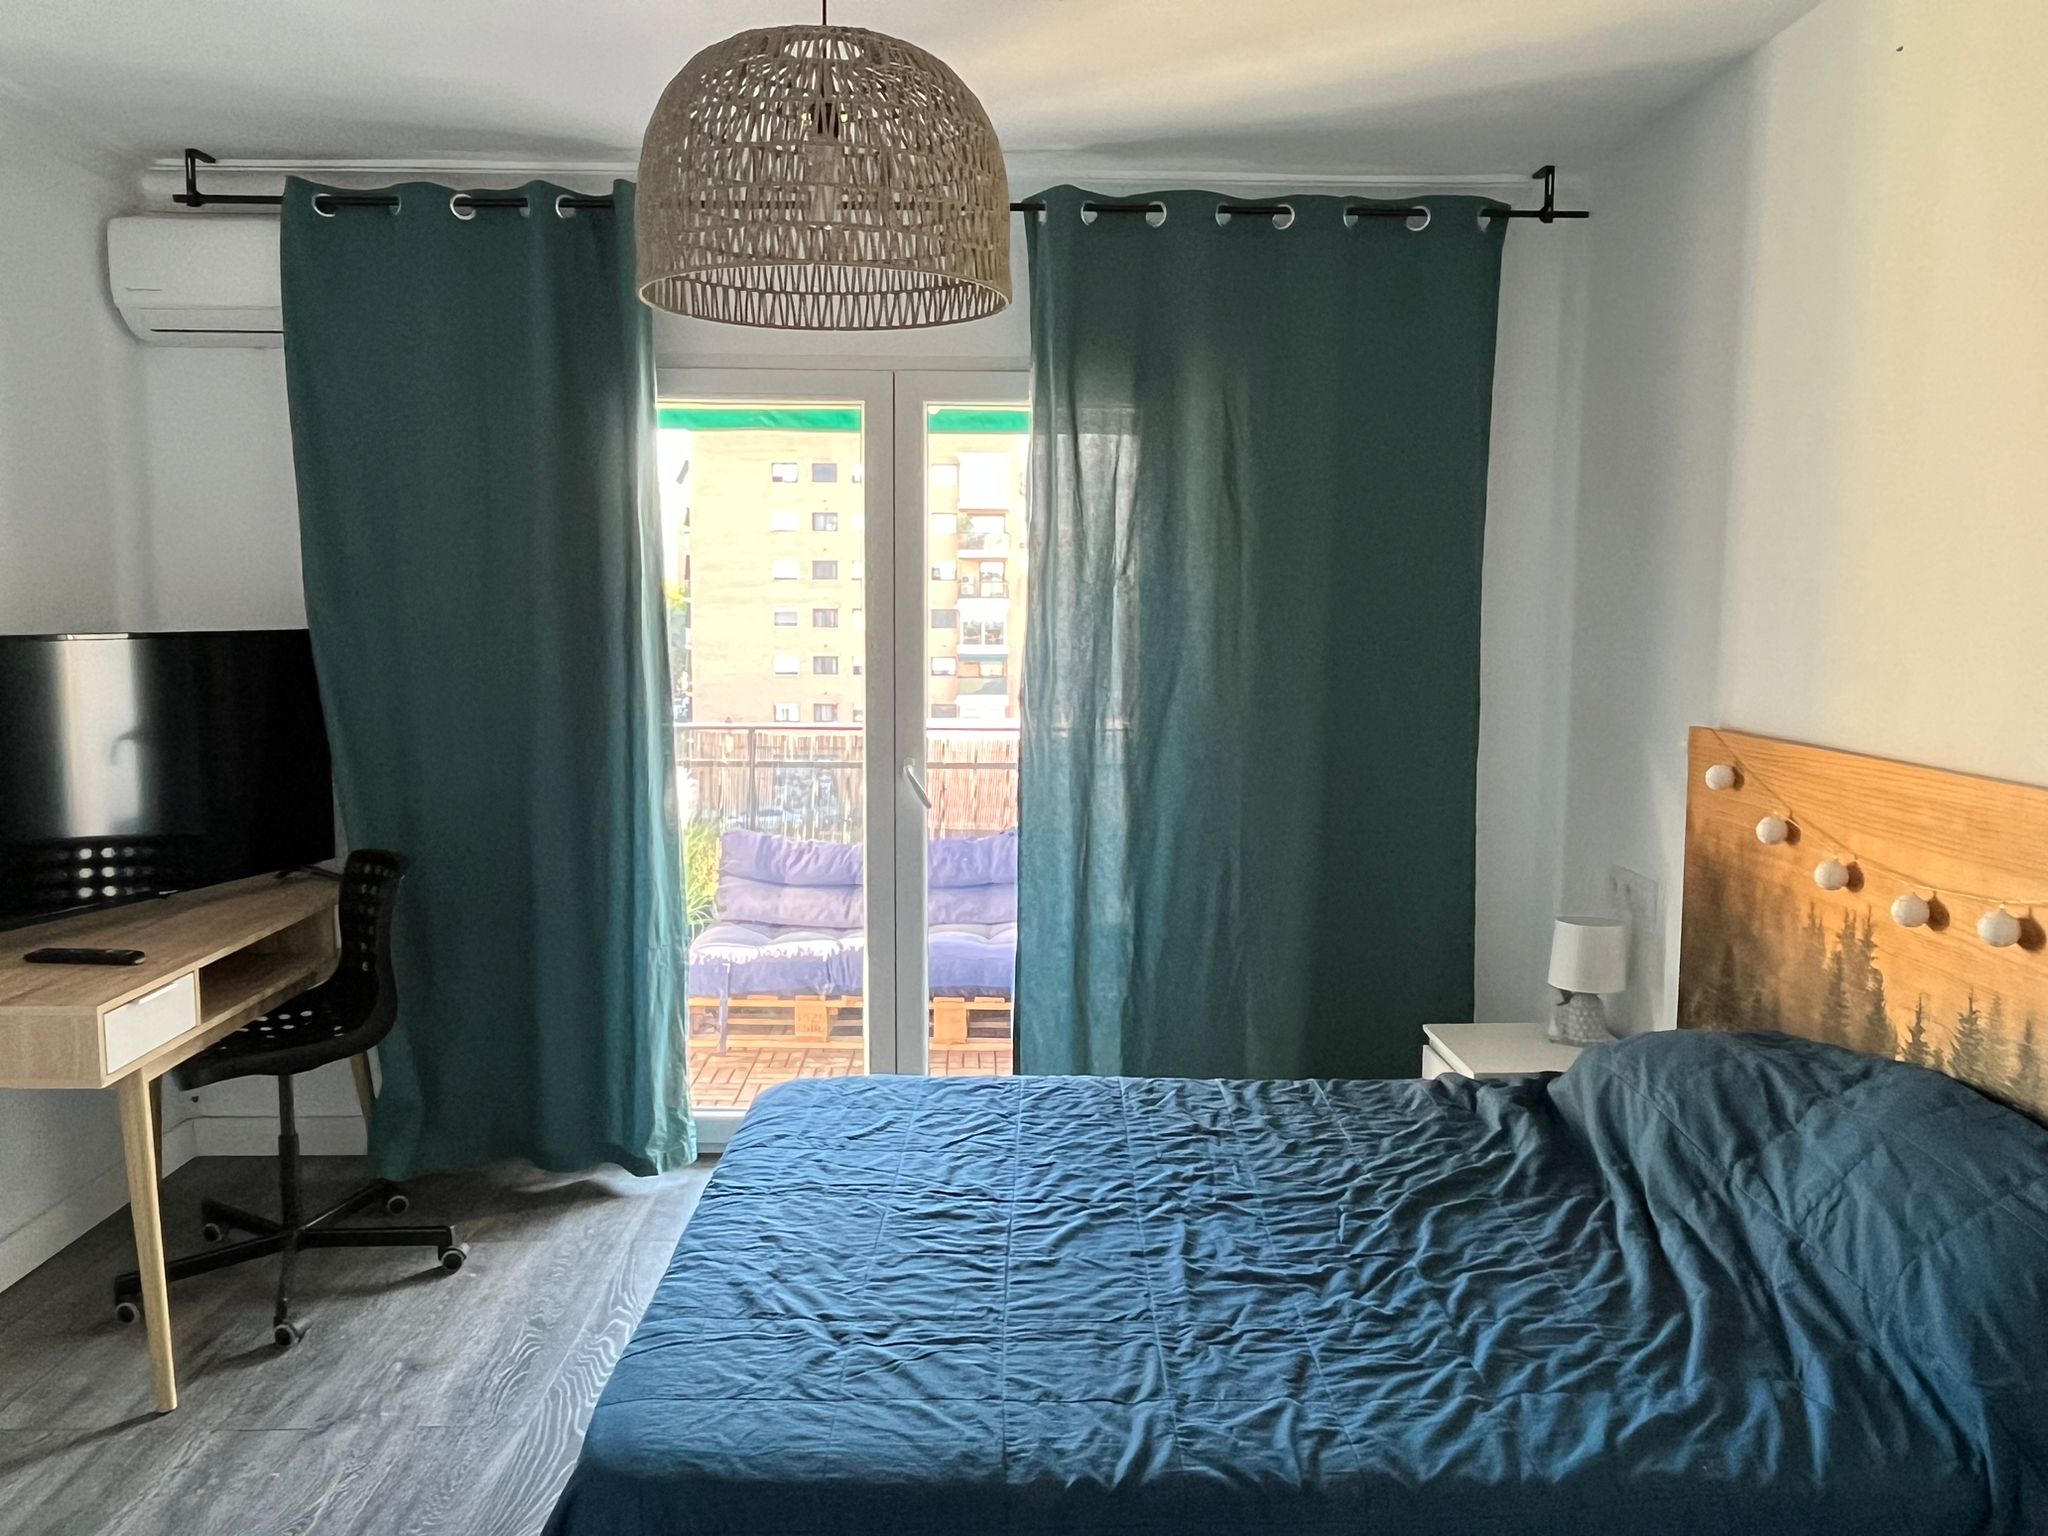 apartment for rent in valencia - bedroom